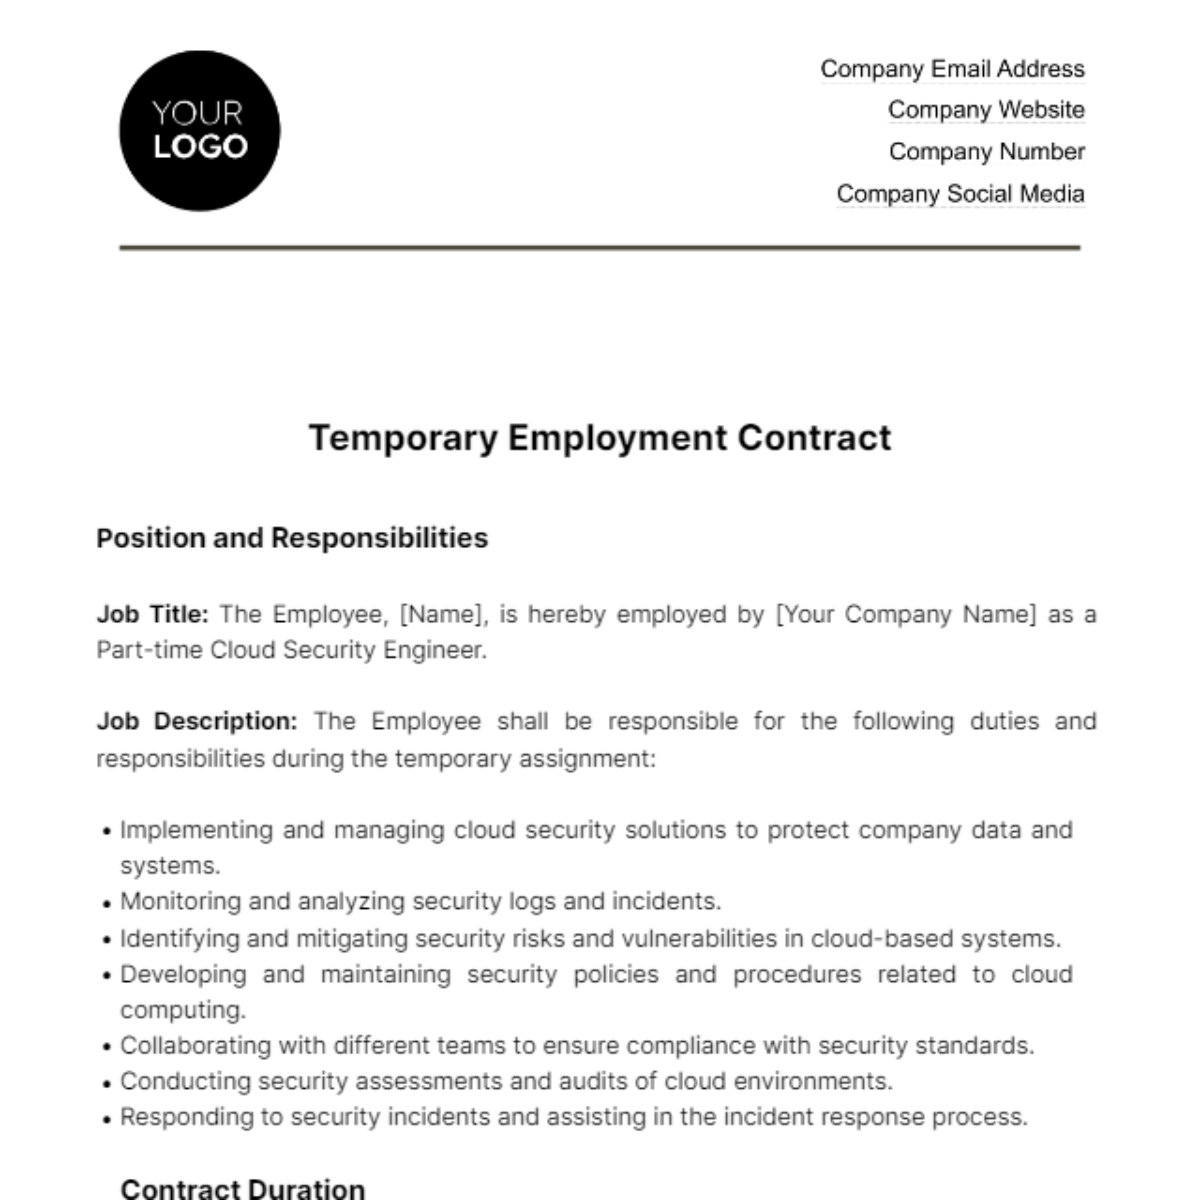 Temporary Employment Contract HR Template